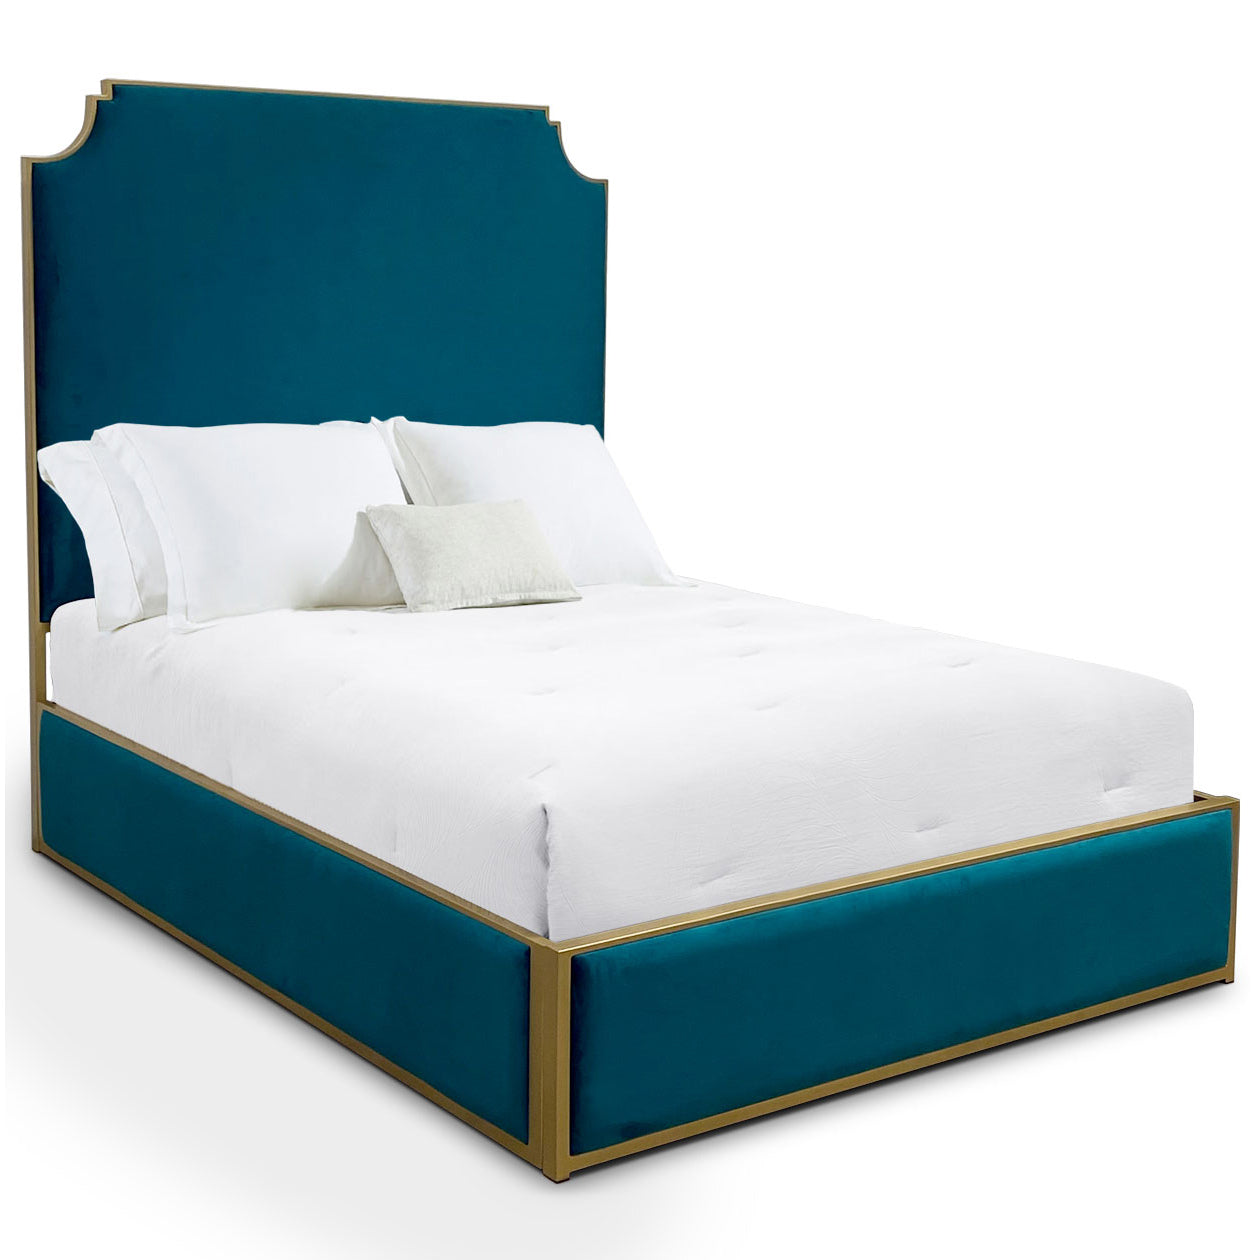 Haven Upholstered Iron Bed 1204 Wesley Allen Queen HB-FS Aged Brass Finish Royal Teal Fabric Matriae